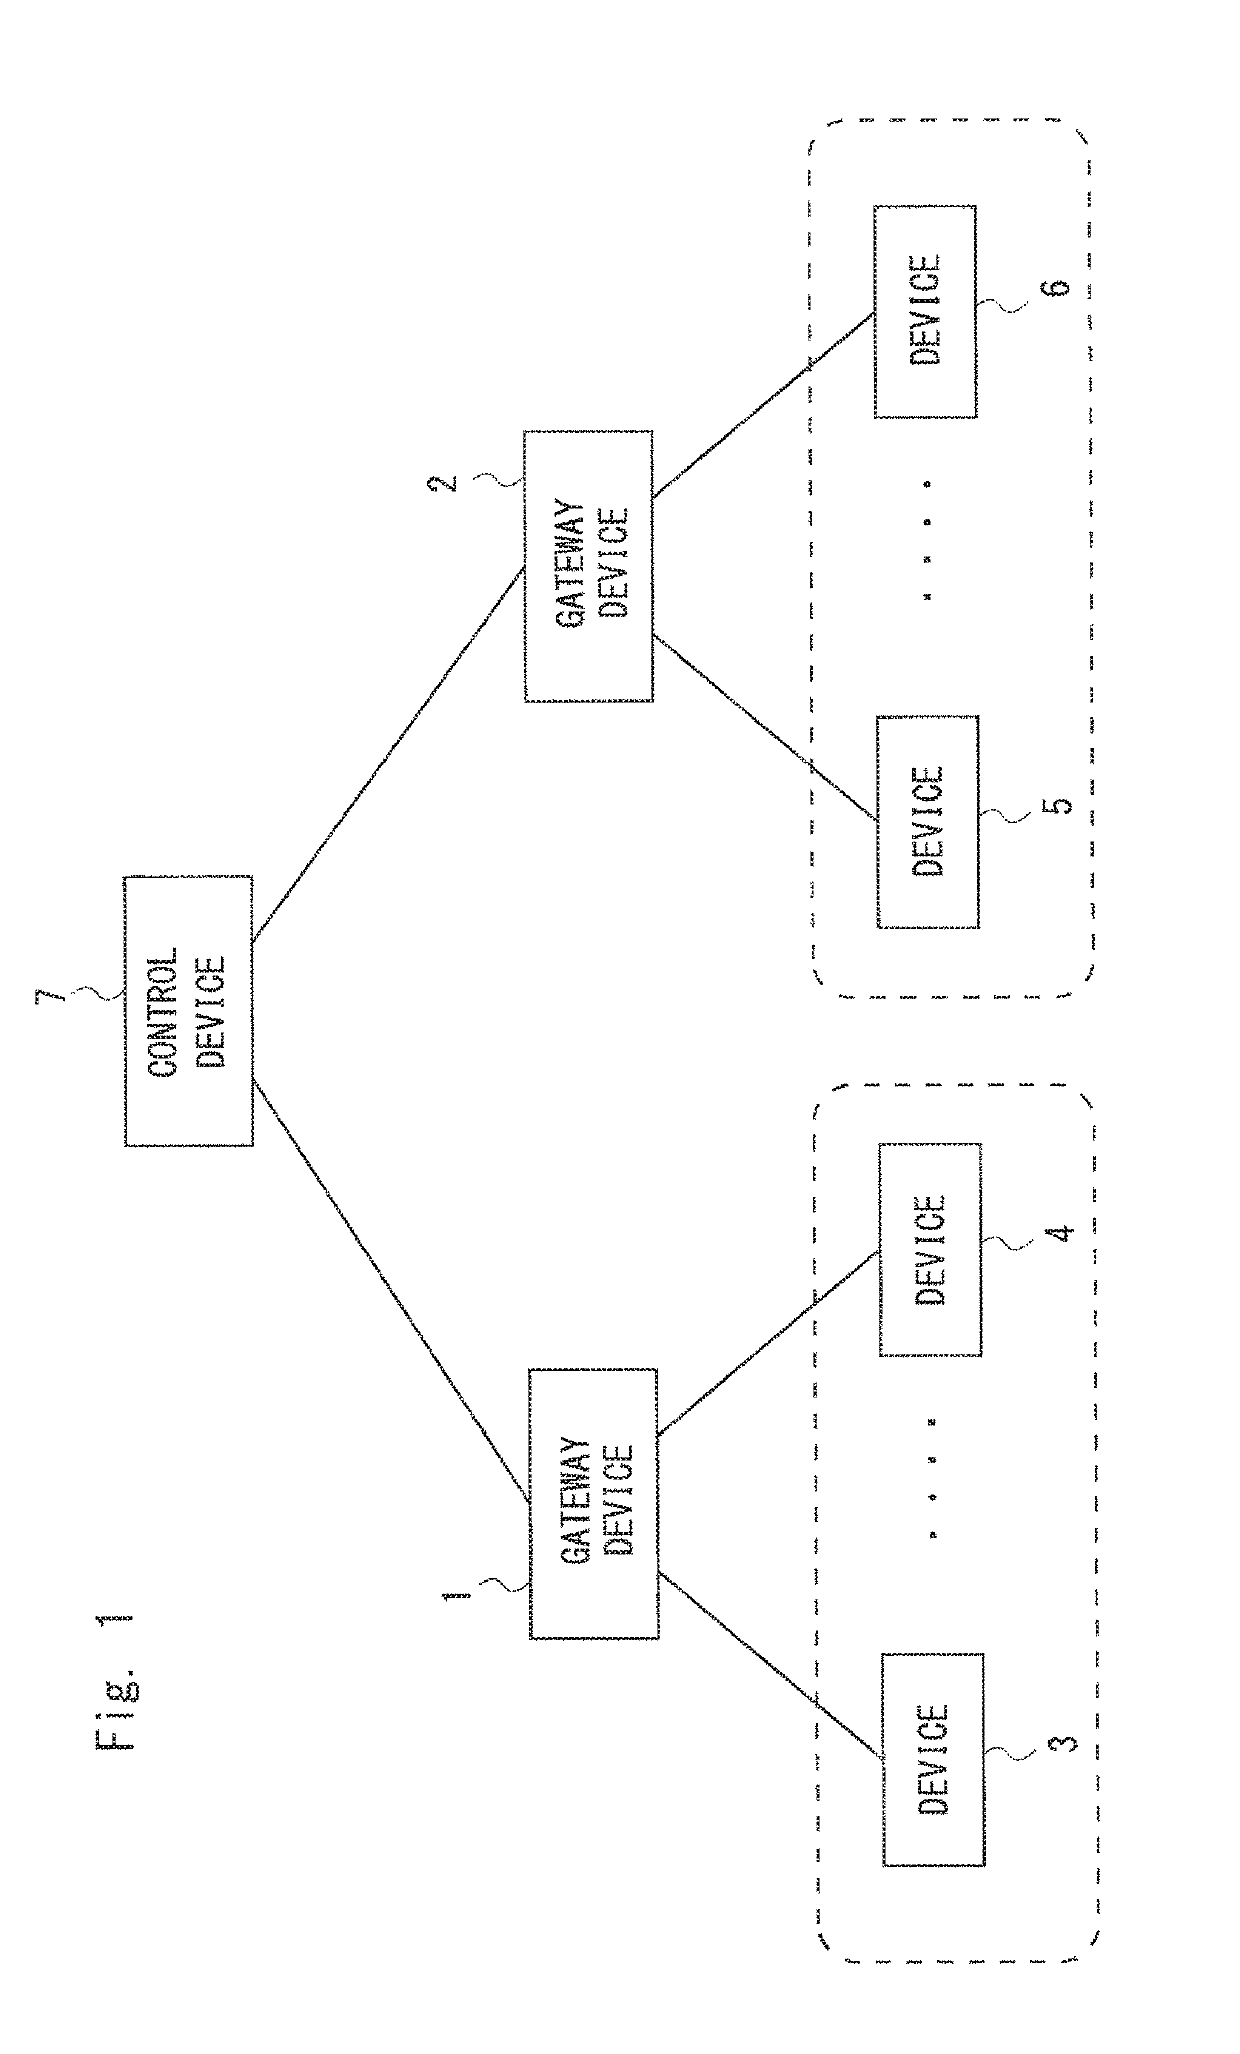 Communication aggregation system, control device, processing load control method and non-transitory computer readable medium storing program